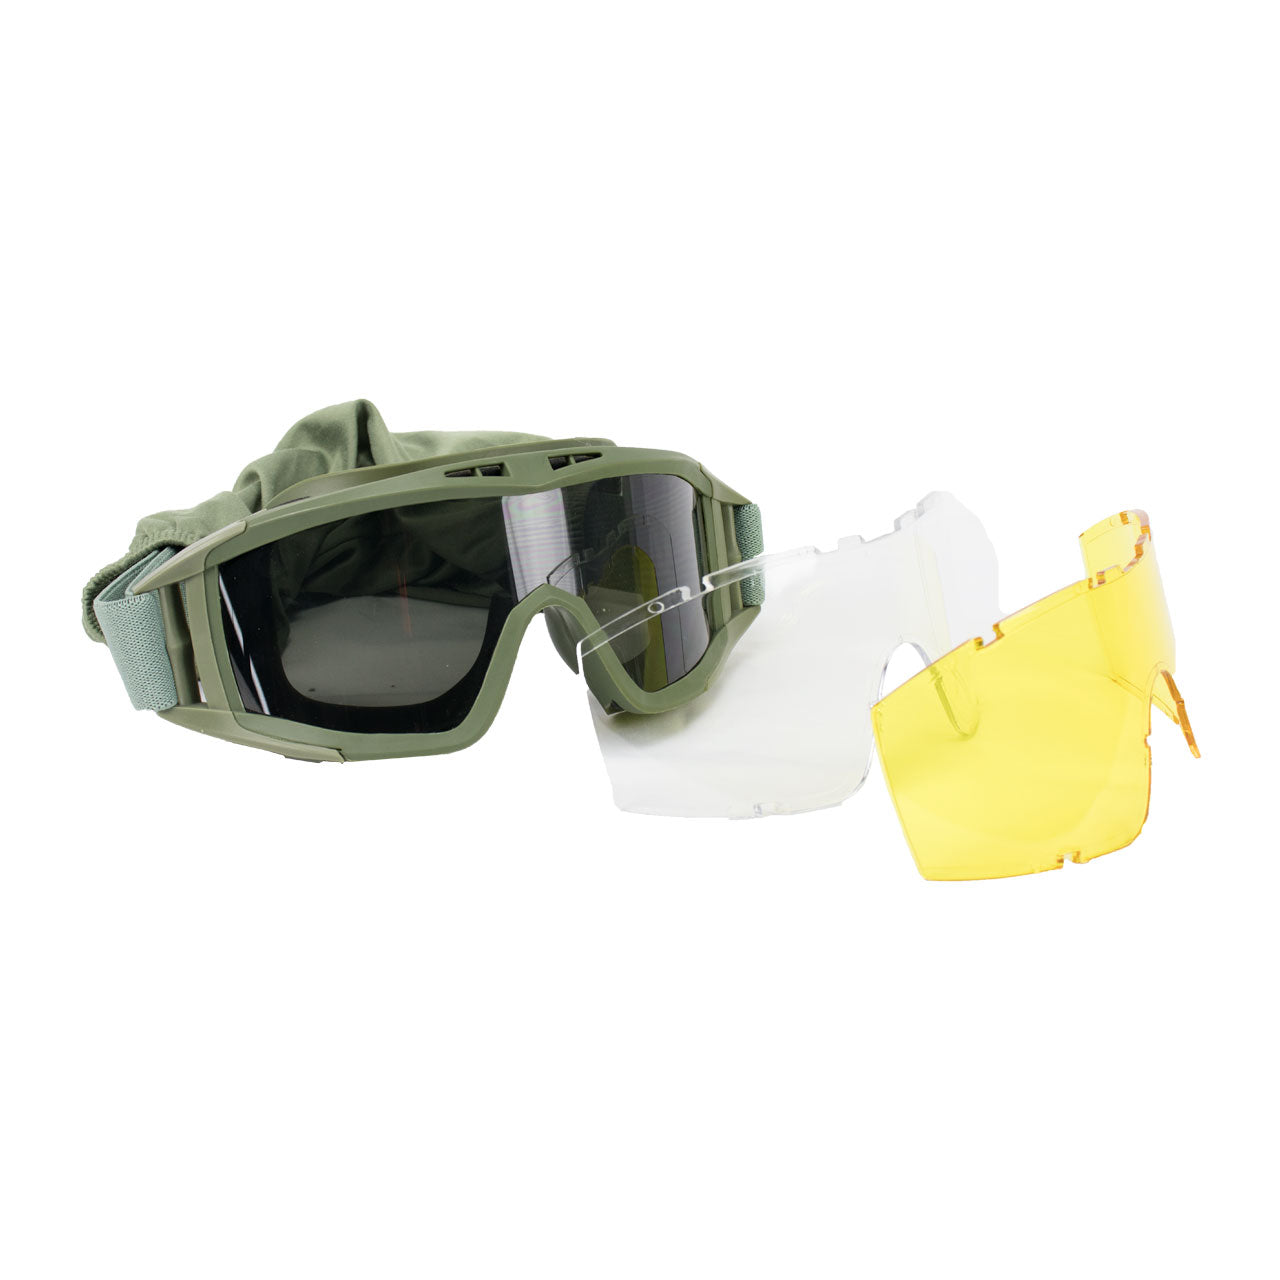 CM DL Tactical Goggles w/ spare lens and strap